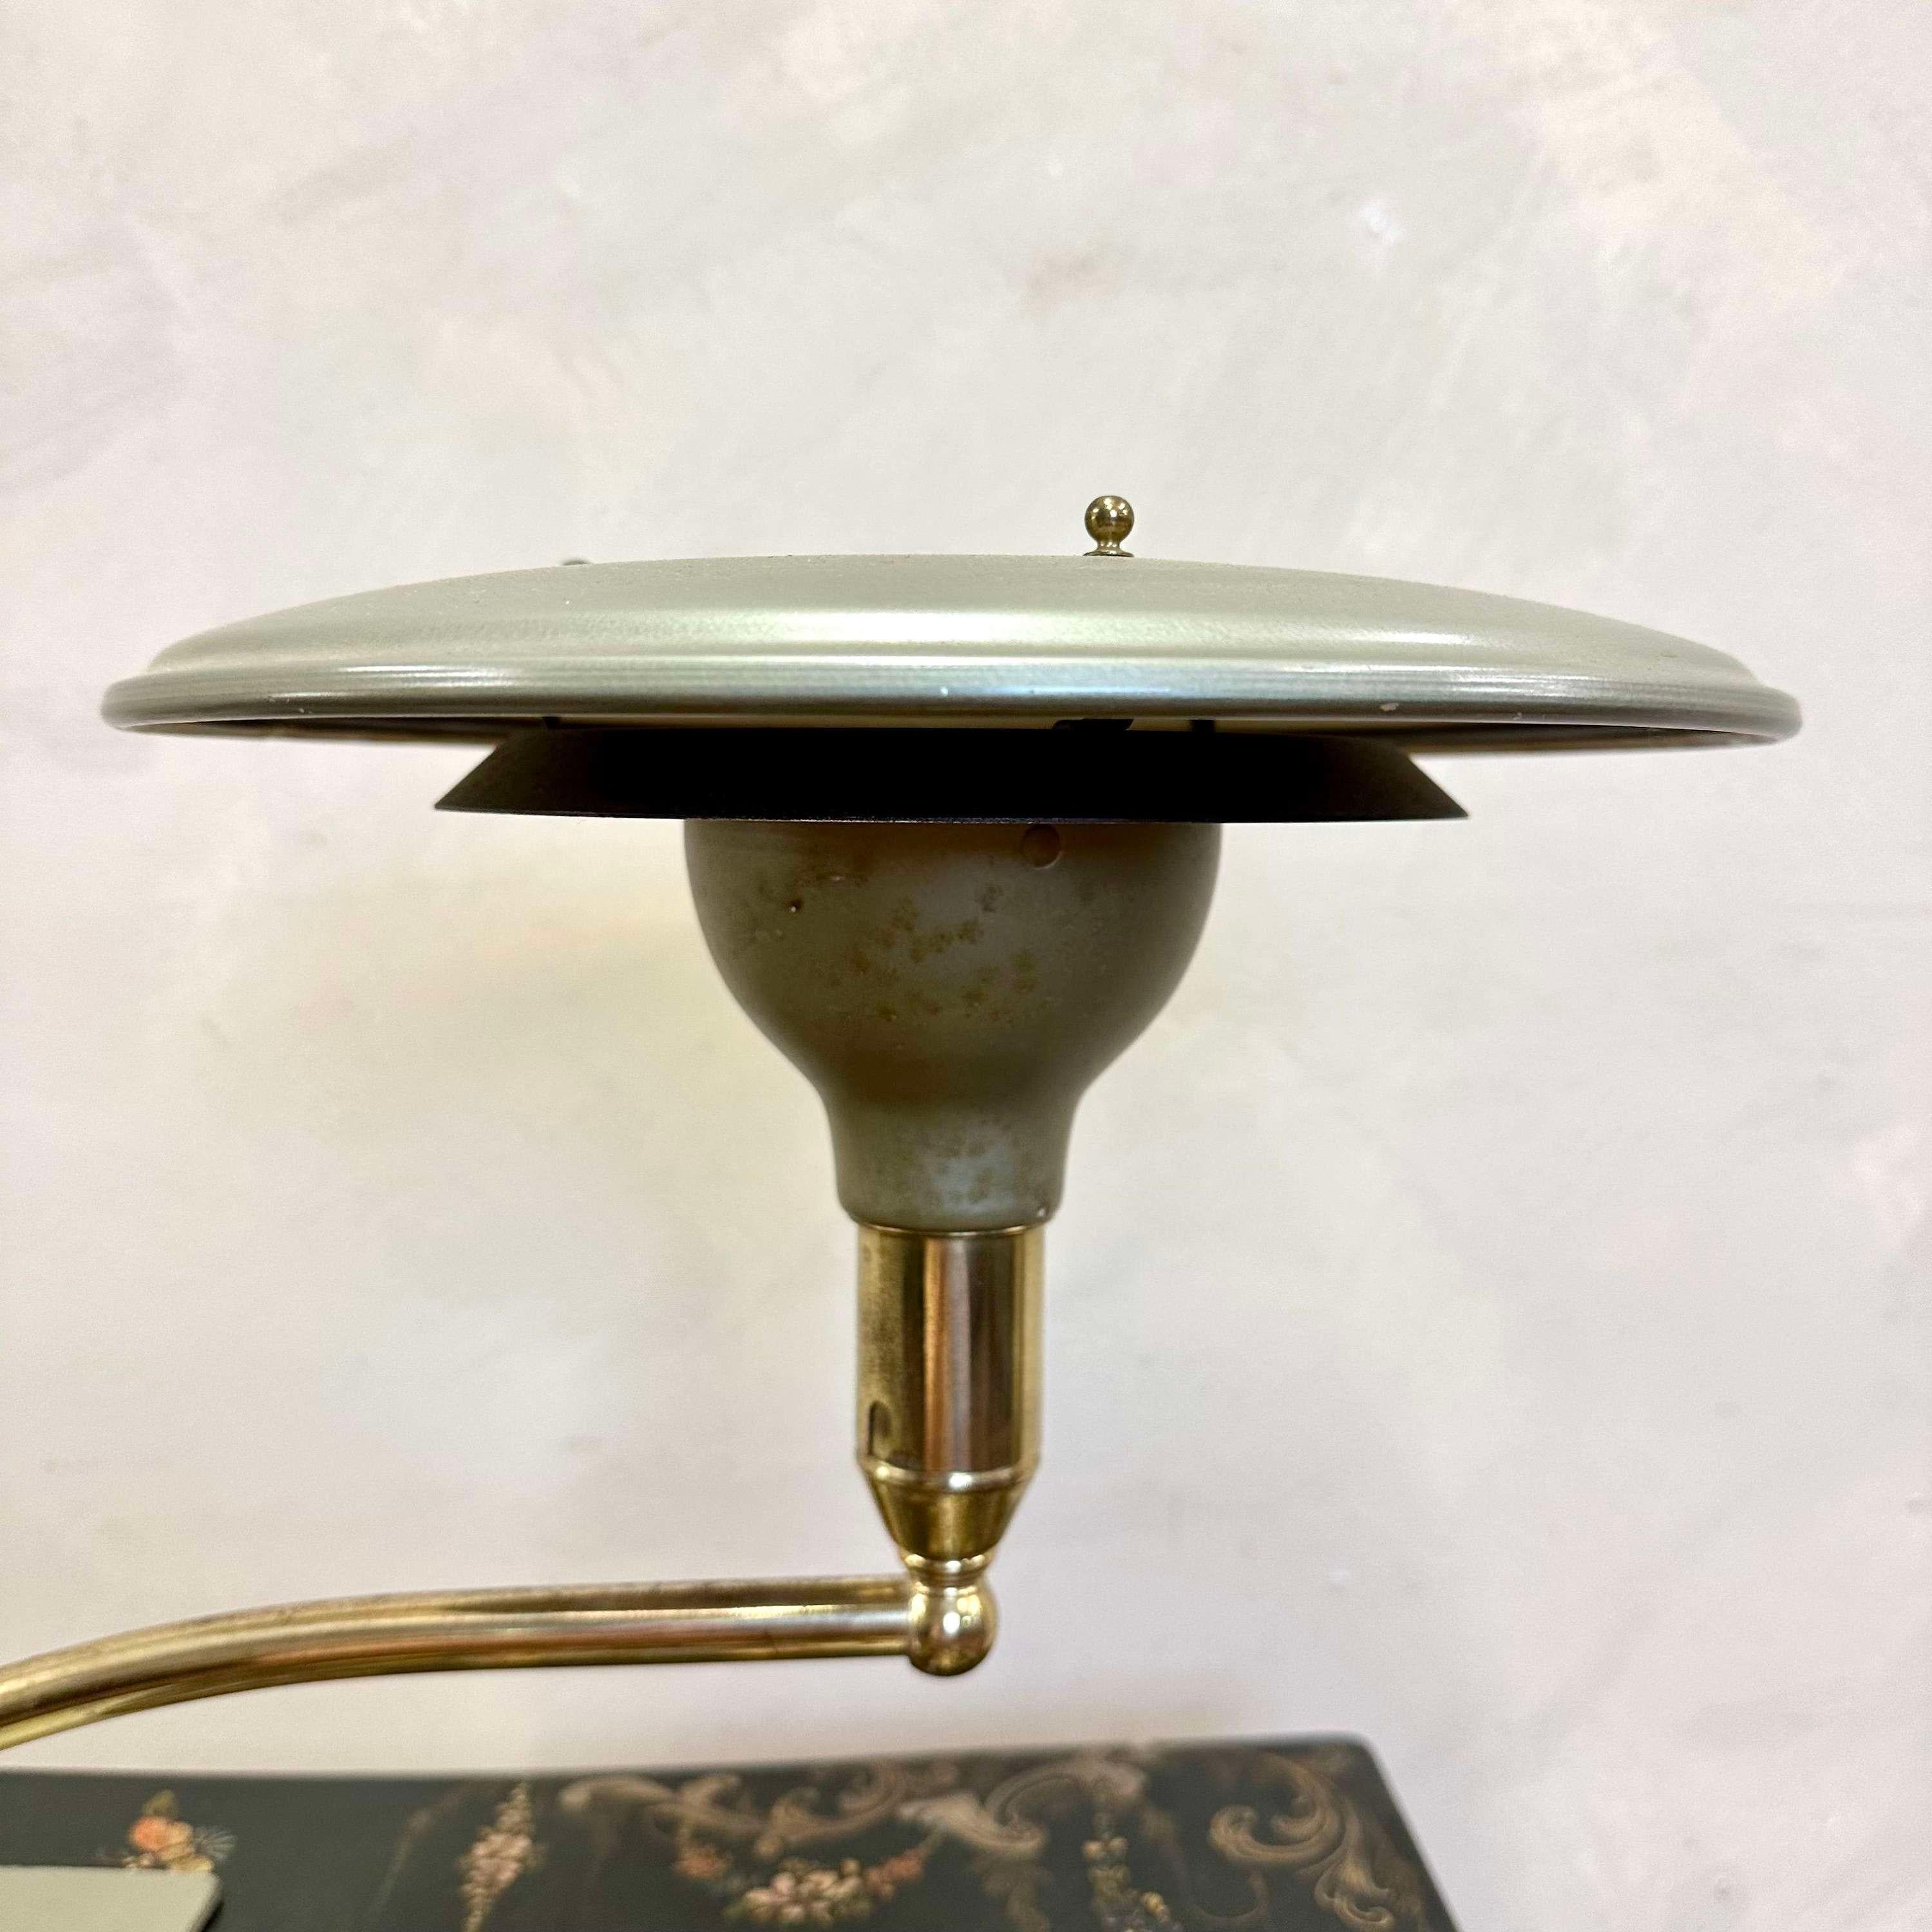 Mid Century Desk Lamp by M.G Wheeler.
A heavy steel base supports an angled, tubular brass arm on a swivelling ball-joint.
All in the original factory finish, with makers markto inner shade.
Light wear commensurate with age, but not detracting.
USA,